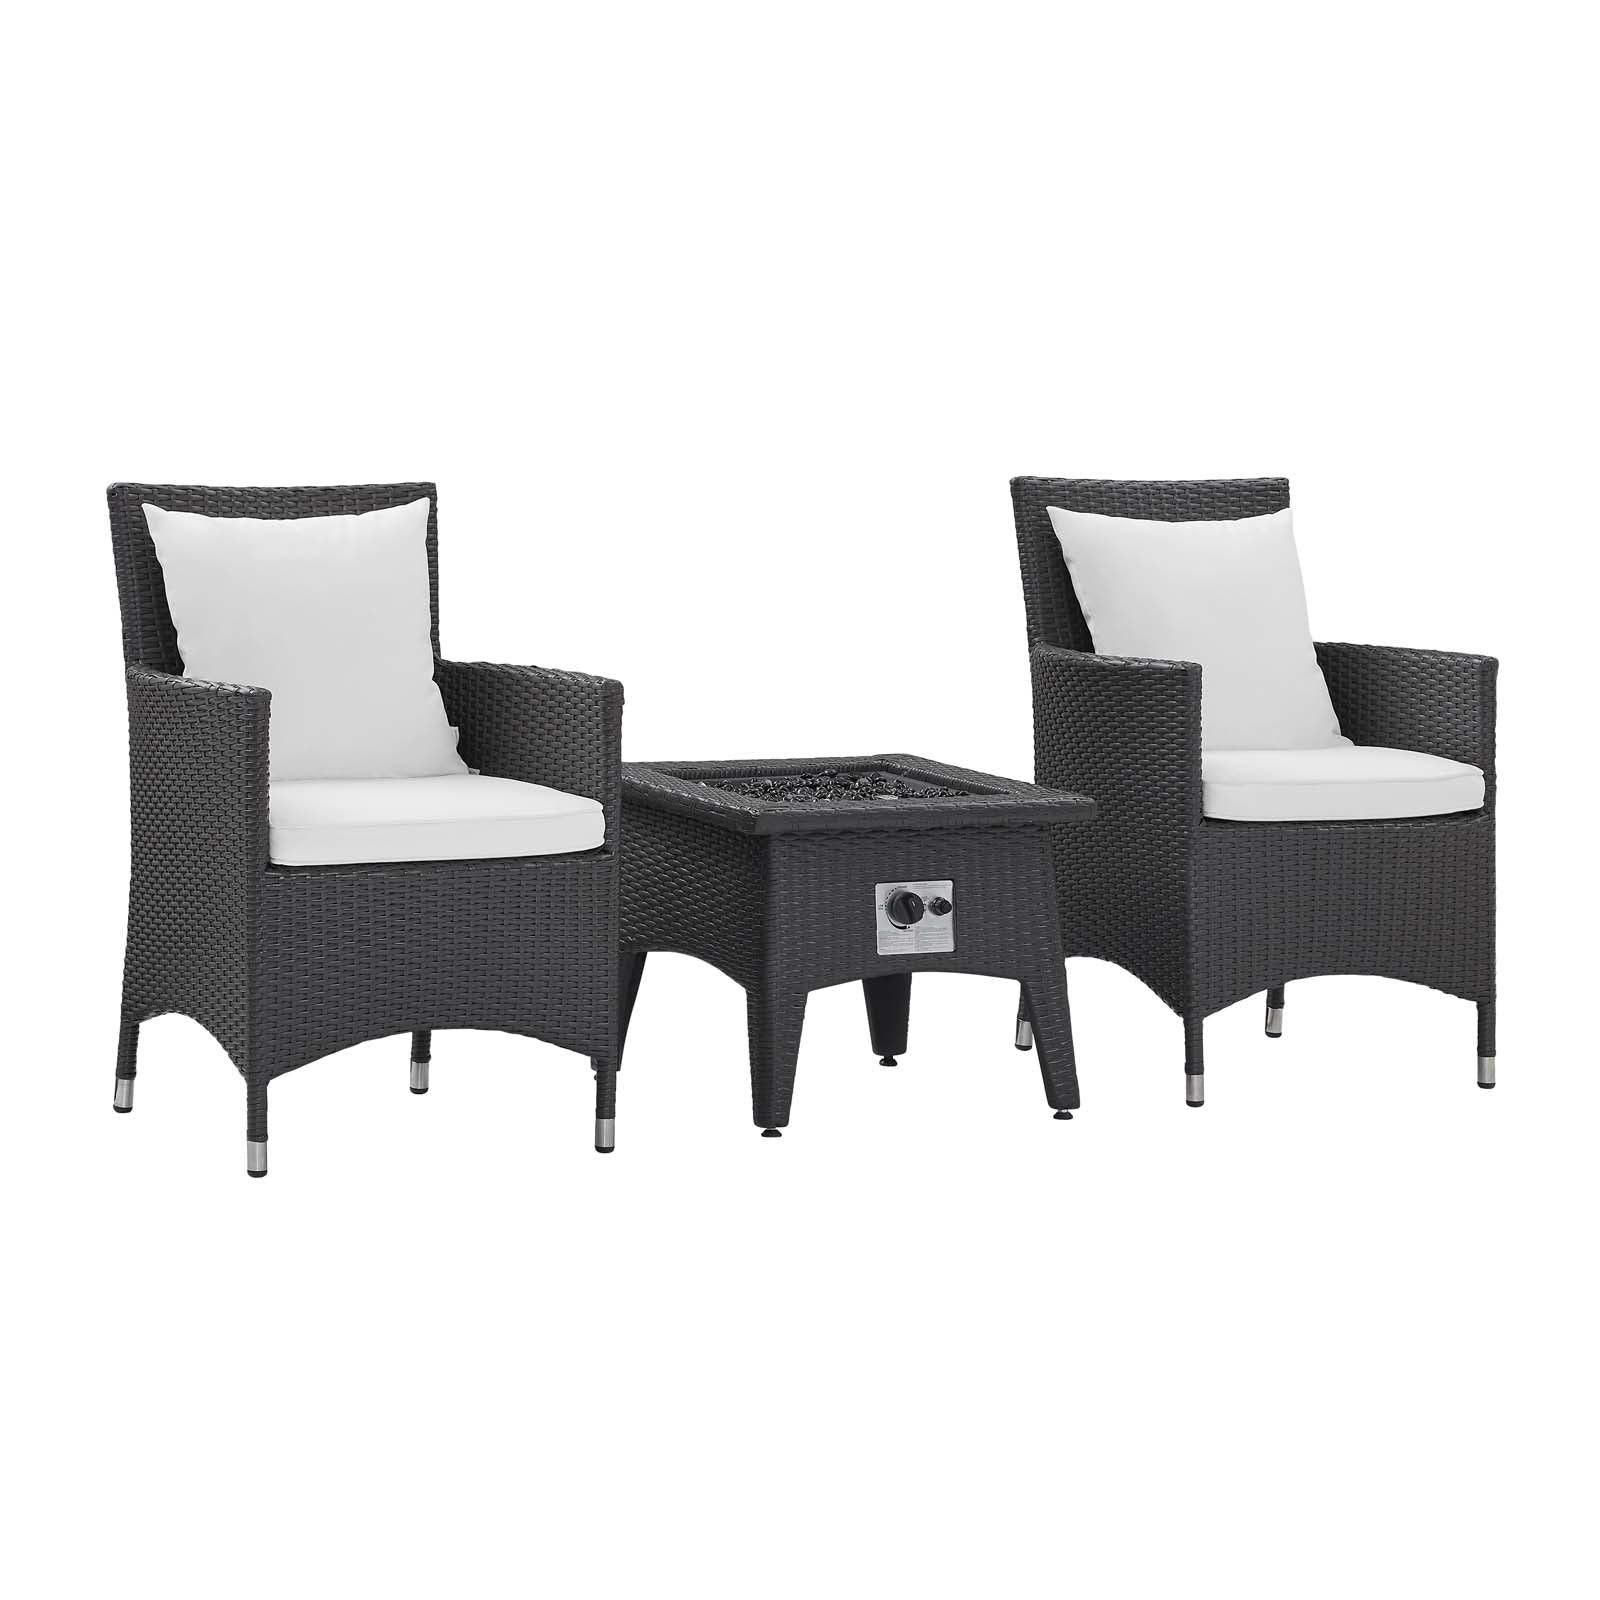 Convene 3 Piece Set Outdoor Patio with Fire Pit - East Shore Modern Home Furnishings